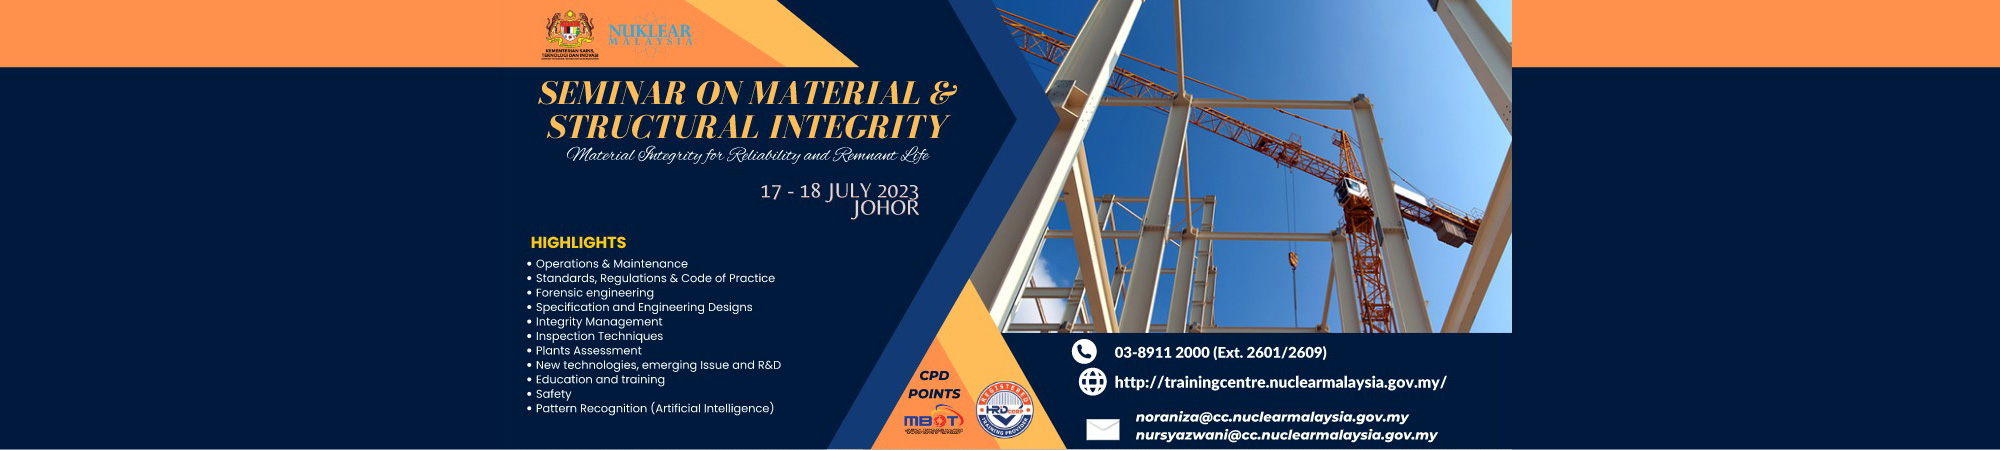 seminar on material & structural integrity